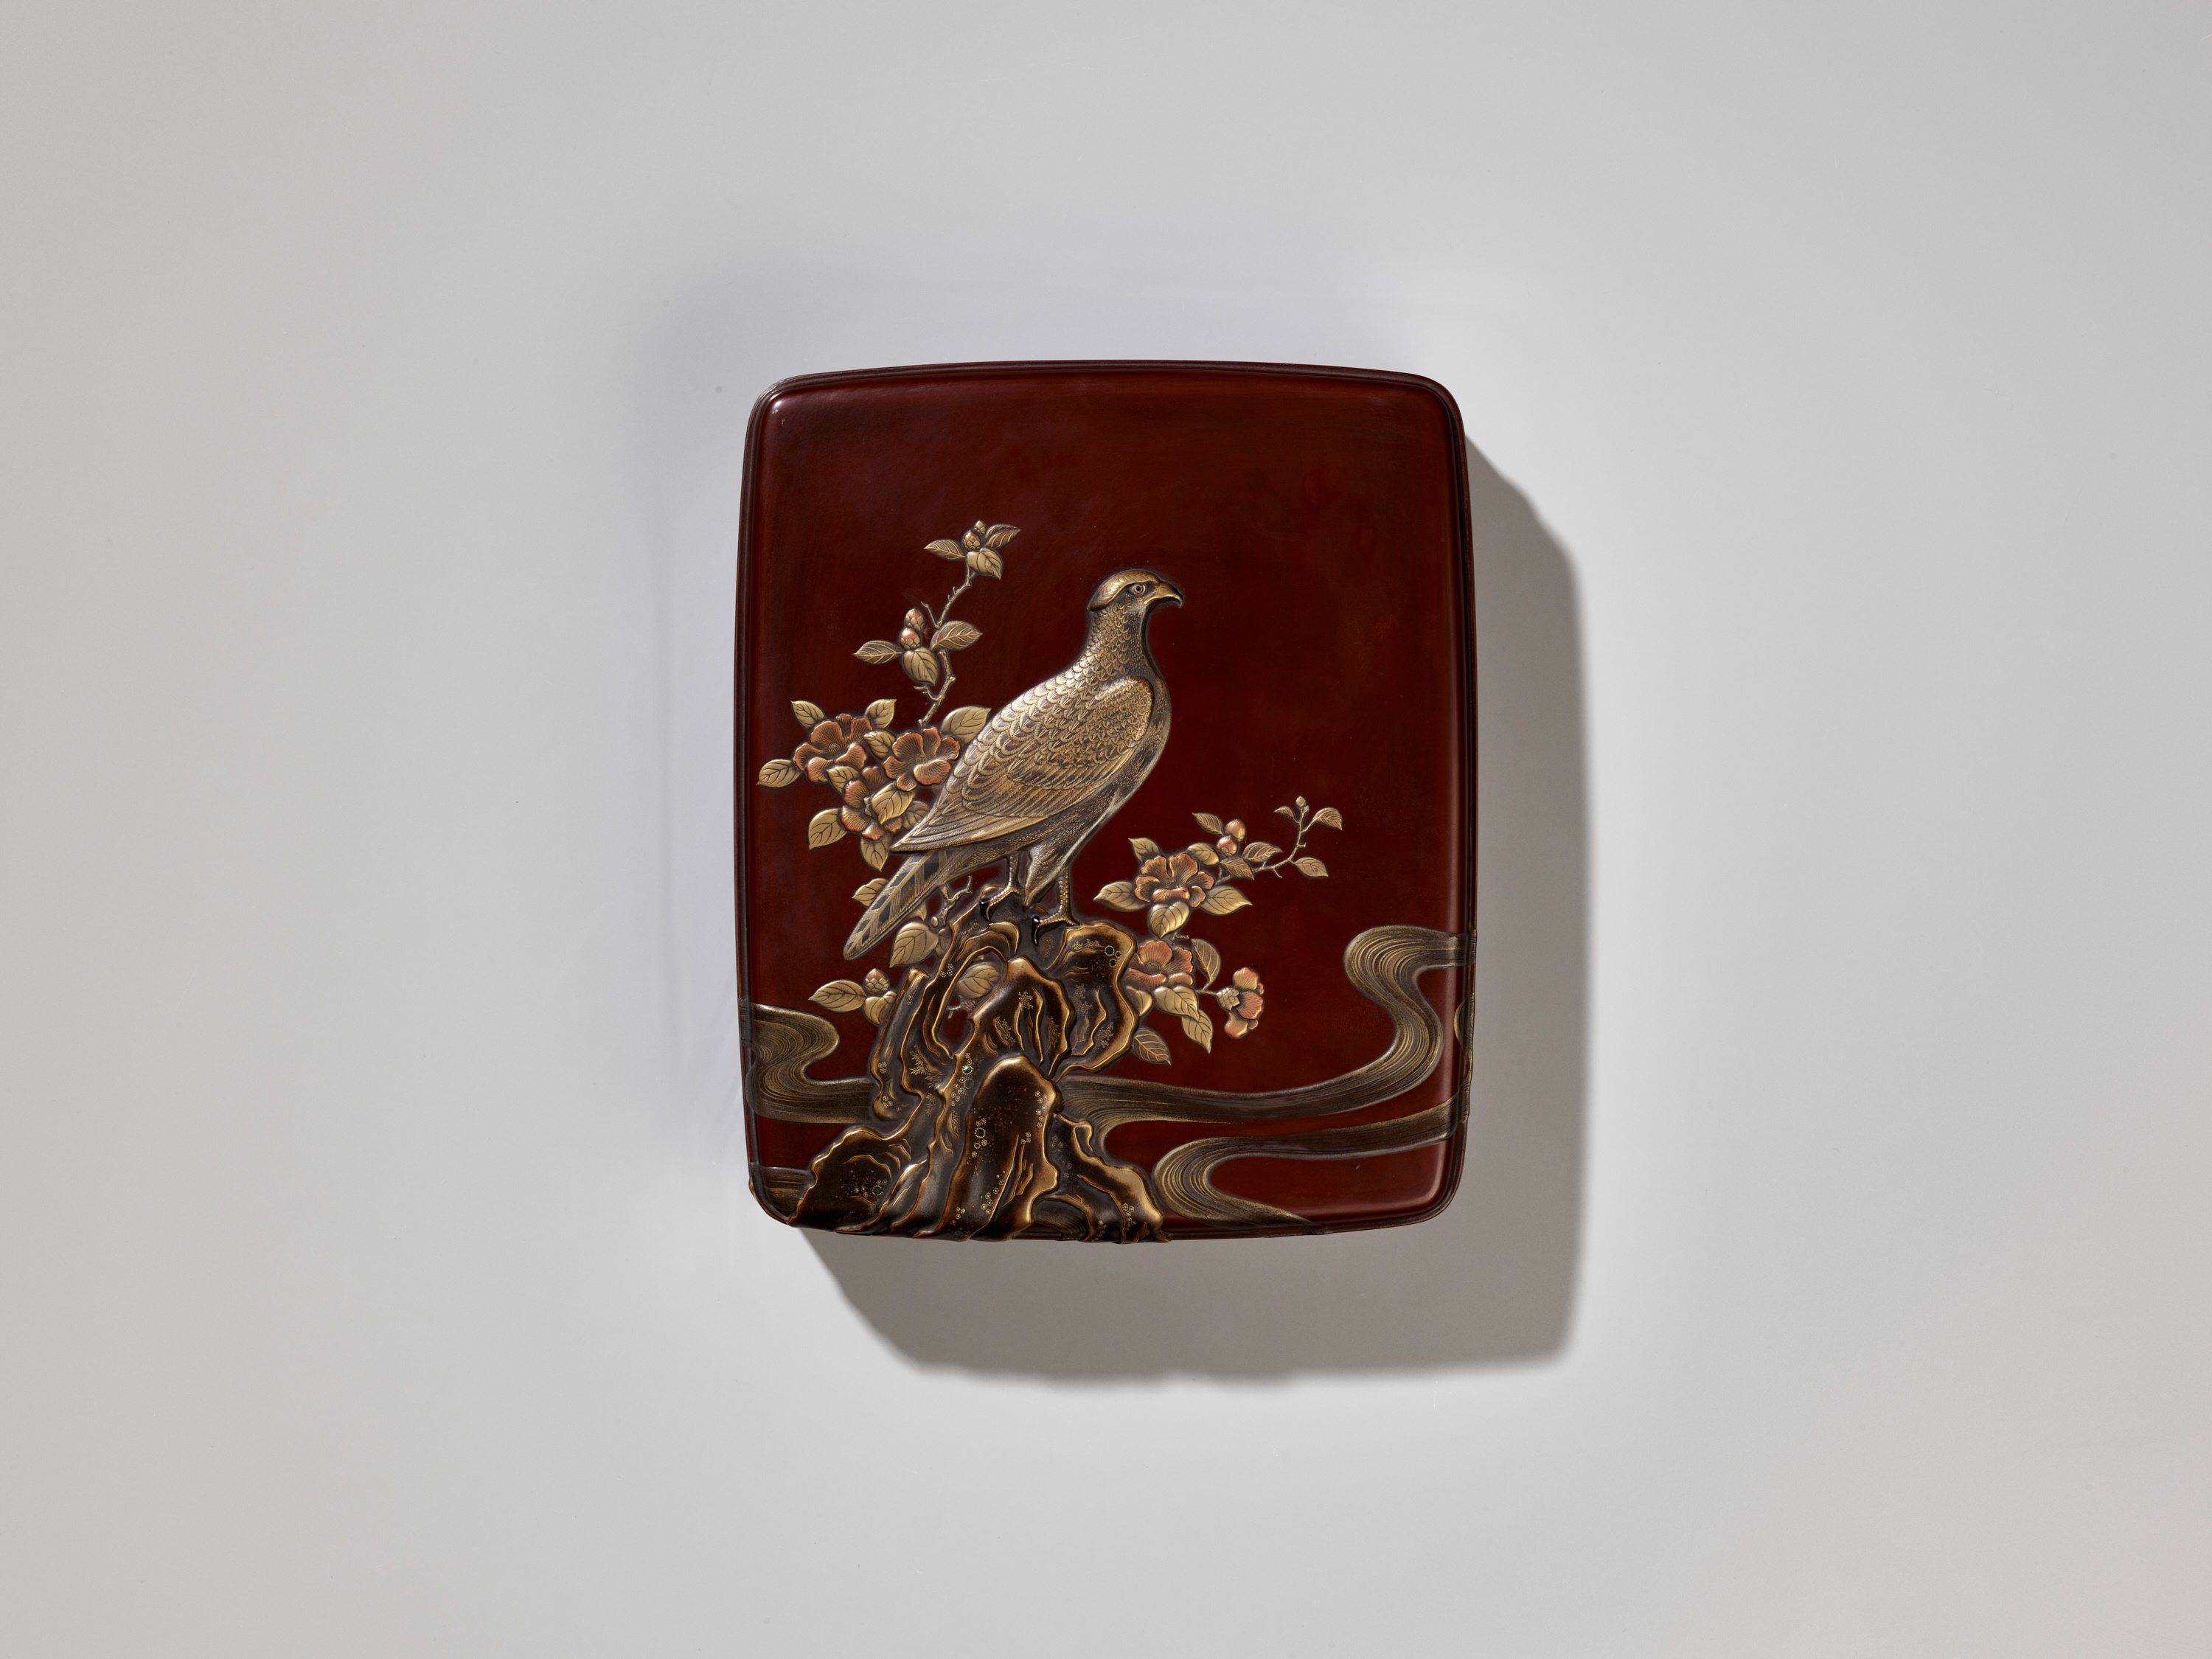 SHOGAKU: A SUPERB LACQUER SUZURIBAKO DEPICTING AN AUTUMNAL SCENE WITH FALCON AND SPARROWS - Image 9 of 14